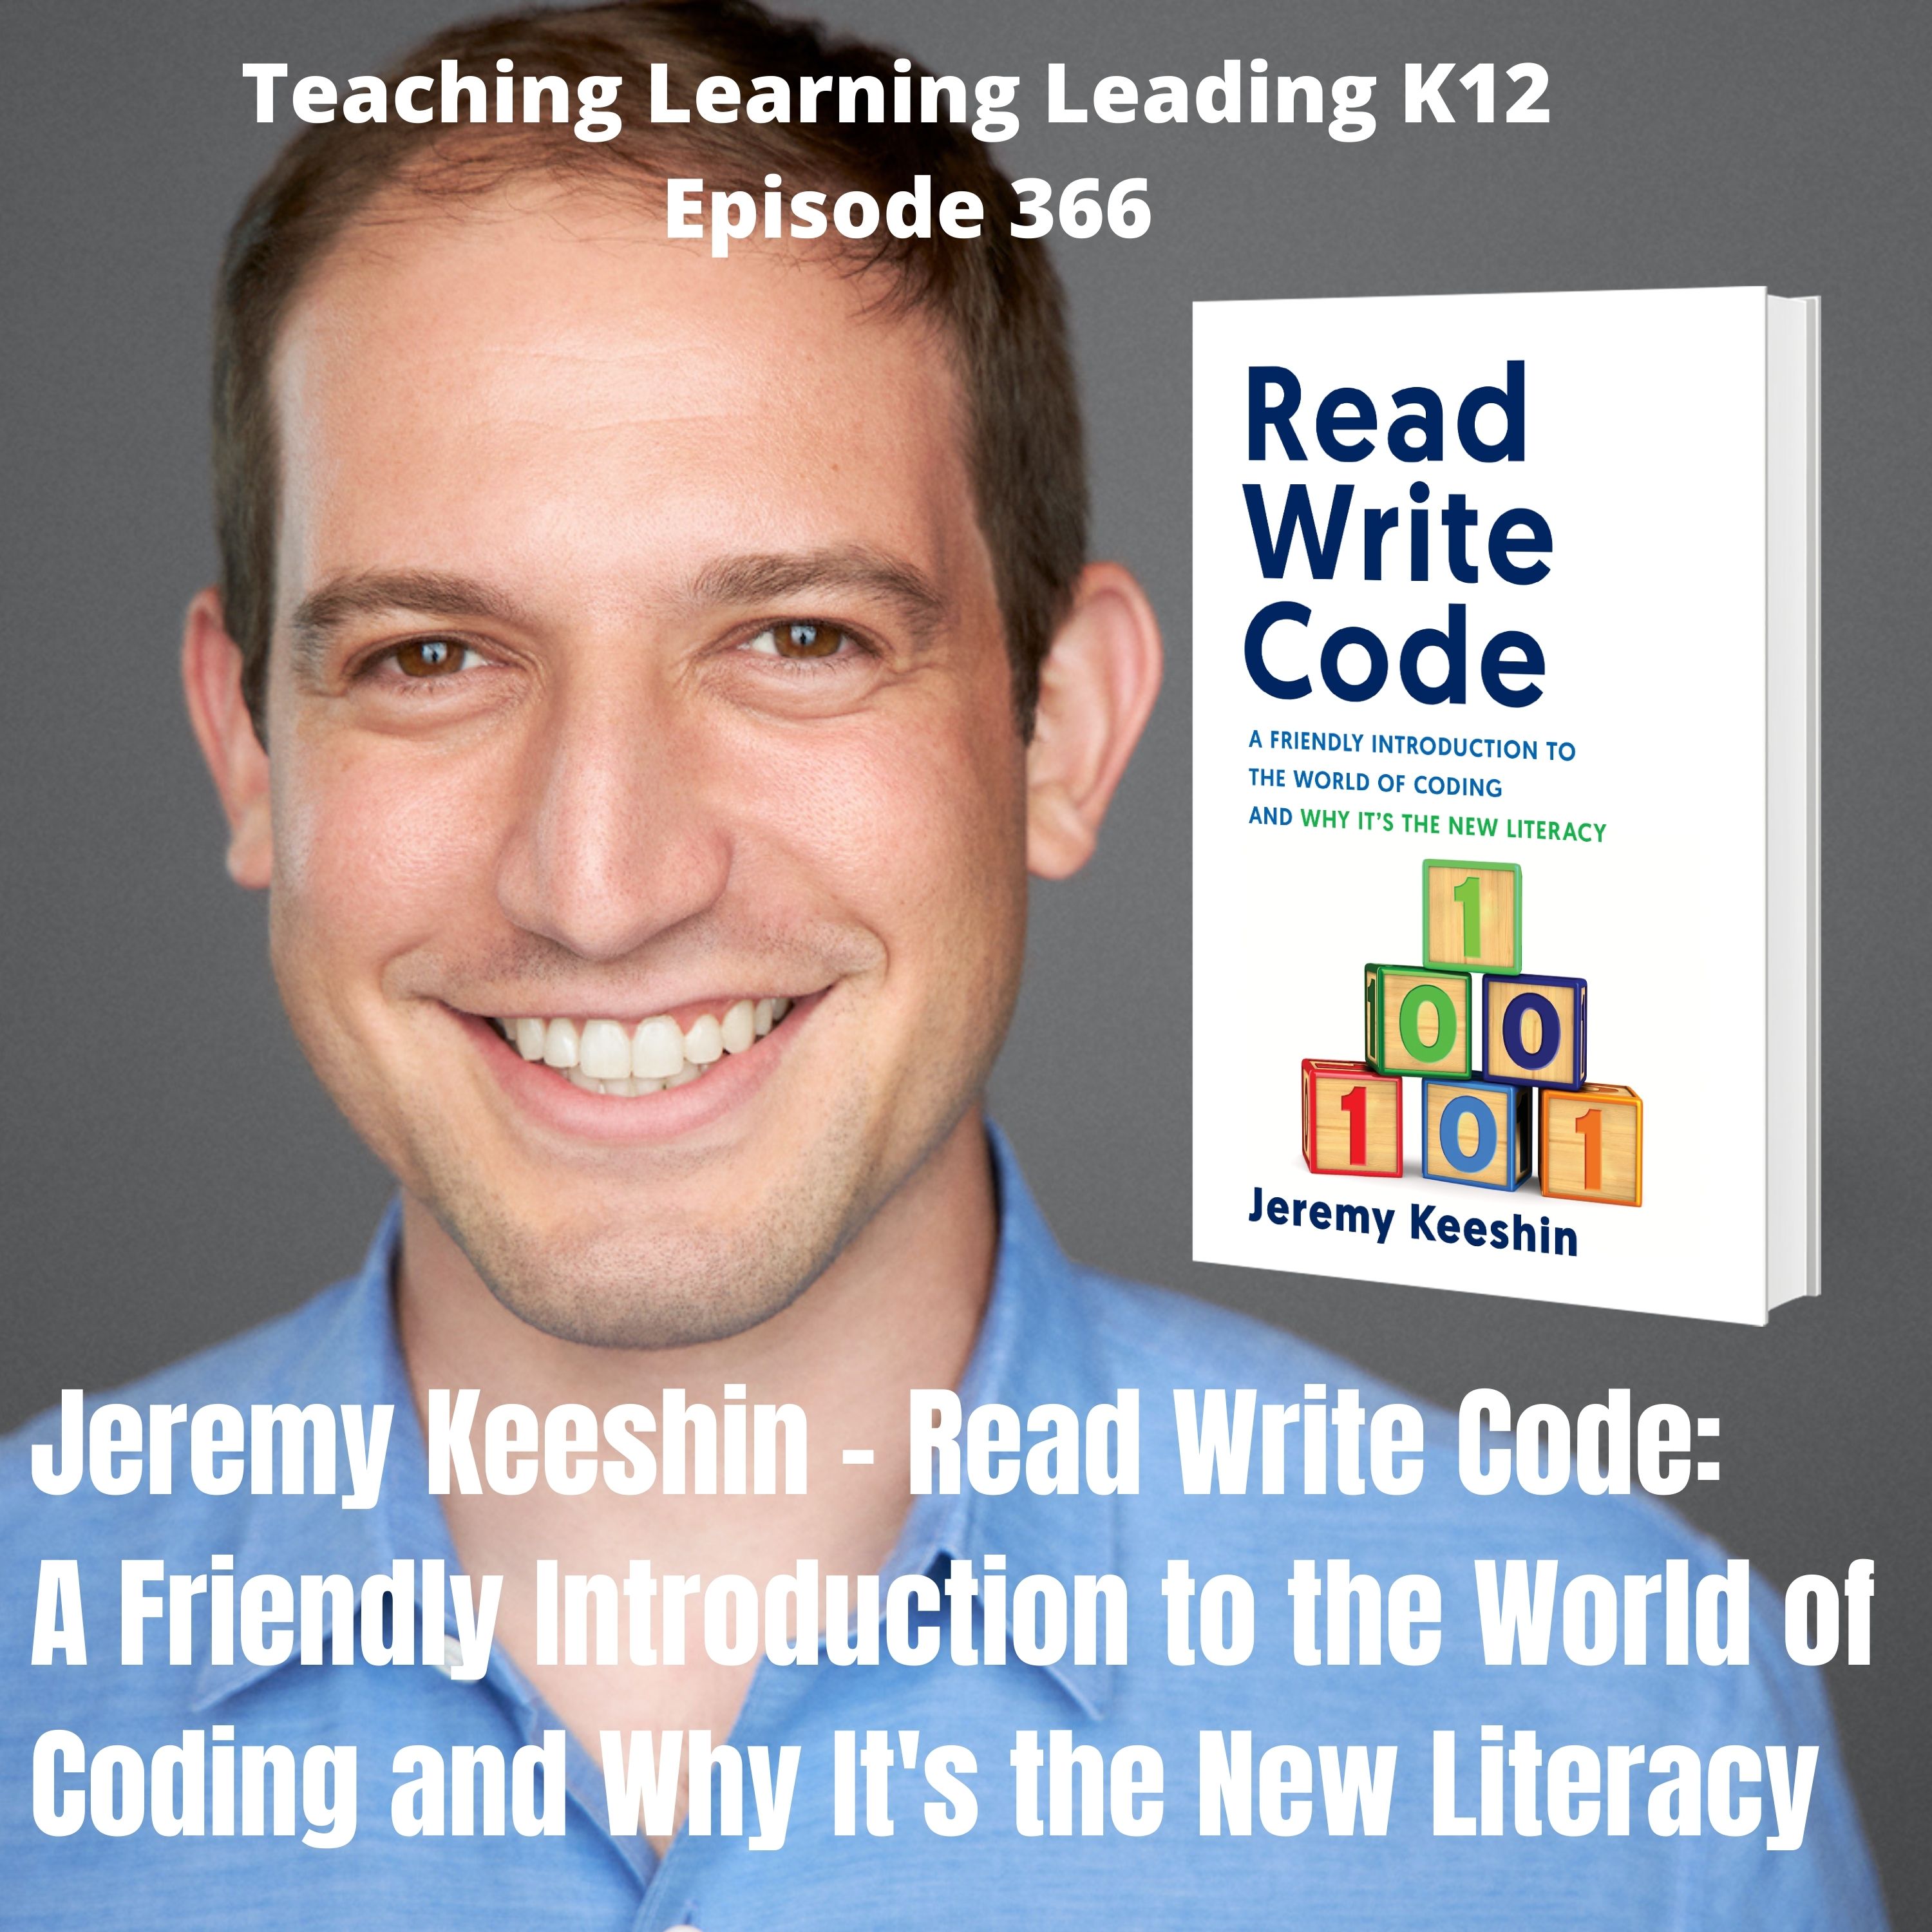 Jeremy Keeshin - Read Write Code: A Friendly Introduction to the World of Coding and Why It's the New Literacy - 366 Image